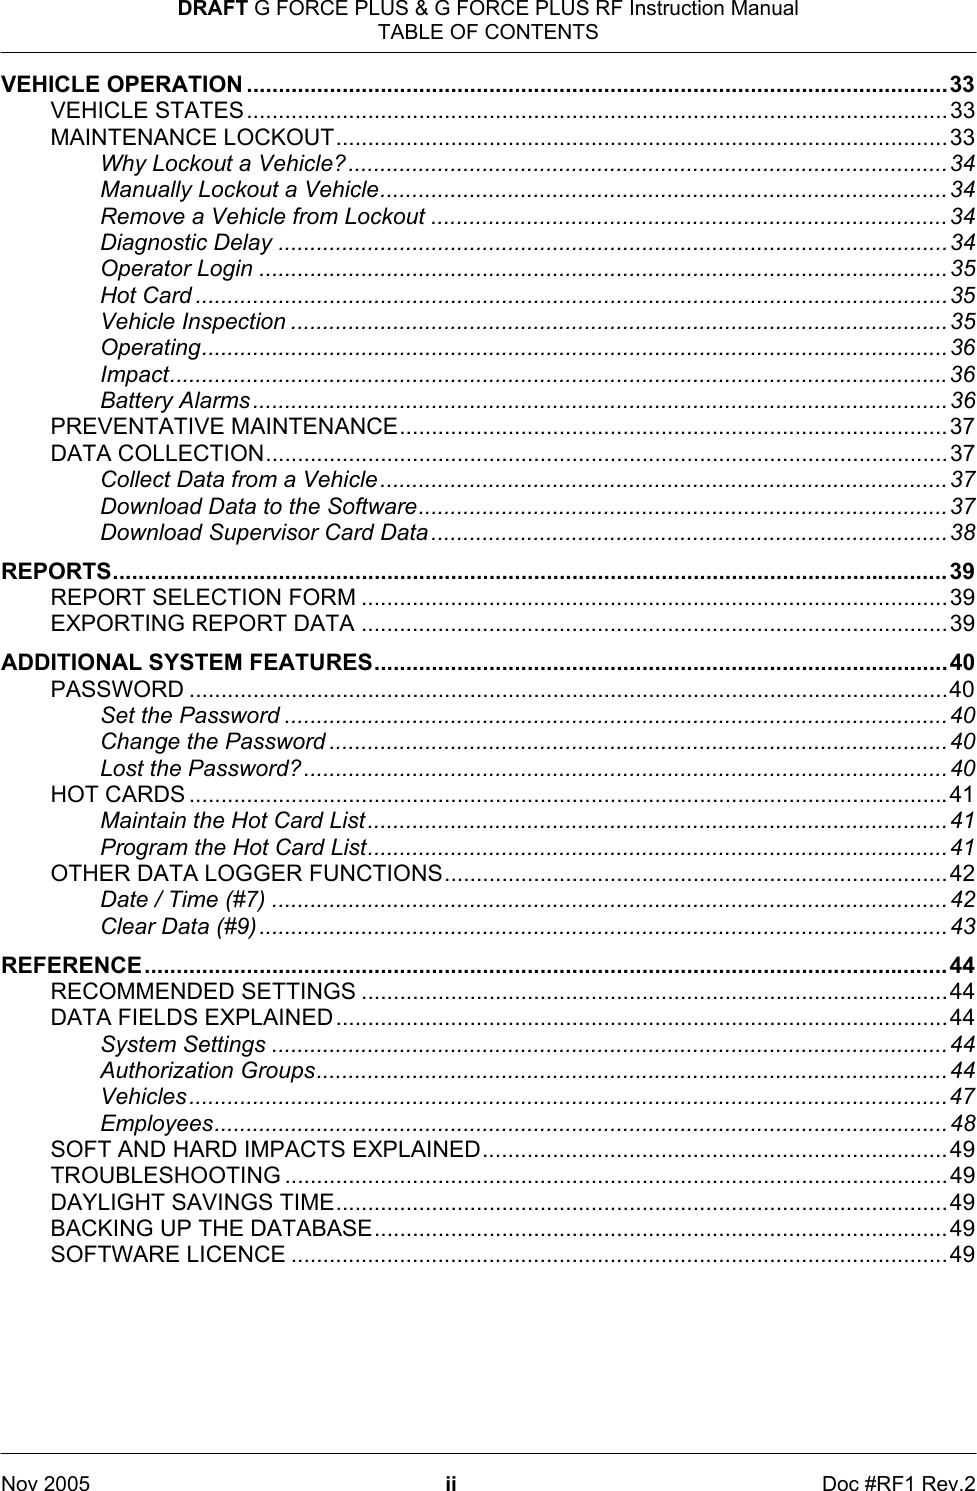 DRAFT G FORCE PLUS &amp; G FORCE PLUS RF Instruction Manual TABLE OF CONTENTS   Nov 2005 ii  Doc #RF1 Rev.2 VEHICLE OPERATION ..............................................................................................................33 VEHICLE STATES..............................................................................................................33 MAINTENANCE LOCKOUT................................................................................................33 Why Lockout a Vehicle?..............................................................................................34 Manually Lockout a Vehicle.........................................................................................34 Remove a Vehicle from Lockout .................................................................................34 Diagnostic Delay .........................................................................................................34 Operator Login ............................................................................................................35 Hot Card ......................................................................................................................35 Vehicle Inspection .......................................................................................................35 Operating.....................................................................................................................36 Impact..........................................................................................................................36 Battery Alarms.............................................................................................................36 PREVENTATIVE MAINTENANCE......................................................................................37 DATA COLLECTION...........................................................................................................37 Collect Data from a Vehicle.........................................................................................37 Download Data to the Software...................................................................................37 Download Supervisor Card Data.................................................................................38 REPORTS...................................................................................................................................39 REPORT SELECTION FORM ............................................................................................39 EXPORTING REPORT DATA ............................................................................................39 ADDITIONAL SYSTEM FEATURES..........................................................................................40 PASSWORD .......................................................................................................................40 Set the Password ........................................................................................................40 Change the Password .................................................................................................40 Lost the Password?.....................................................................................................40 HOT CARDS .......................................................................................................................41 Maintain the Hot Card List...........................................................................................41 Program the Hot Card List...........................................................................................41 OTHER DATA LOGGER FUNCTIONS...............................................................................42 Date / Time (#7) ..........................................................................................................42 Clear Data (#9)............................................................................................................43 REFERENCE..............................................................................................................................44 RECOMMENDED SETTINGS ............................................................................................44 DATA FIELDS EXPLAINED................................................................................................44 System Settings ..........................................................................................................44 Authorization Groups...................................................................................................44 Vehicles.......................................................................................................................47 Employees...................................................................................................................48 SOFT AND HARD IMPACTS EXPLAINED.........................................................................49 TROUBLESHOOTING ........................................................................................................49 DAYLIGHT SAVINGS TIME................................................................................................49 BACKING UP THE DATABASE..........................................................................................49 SOFTWARE LICENCE .......................................................................................................49 